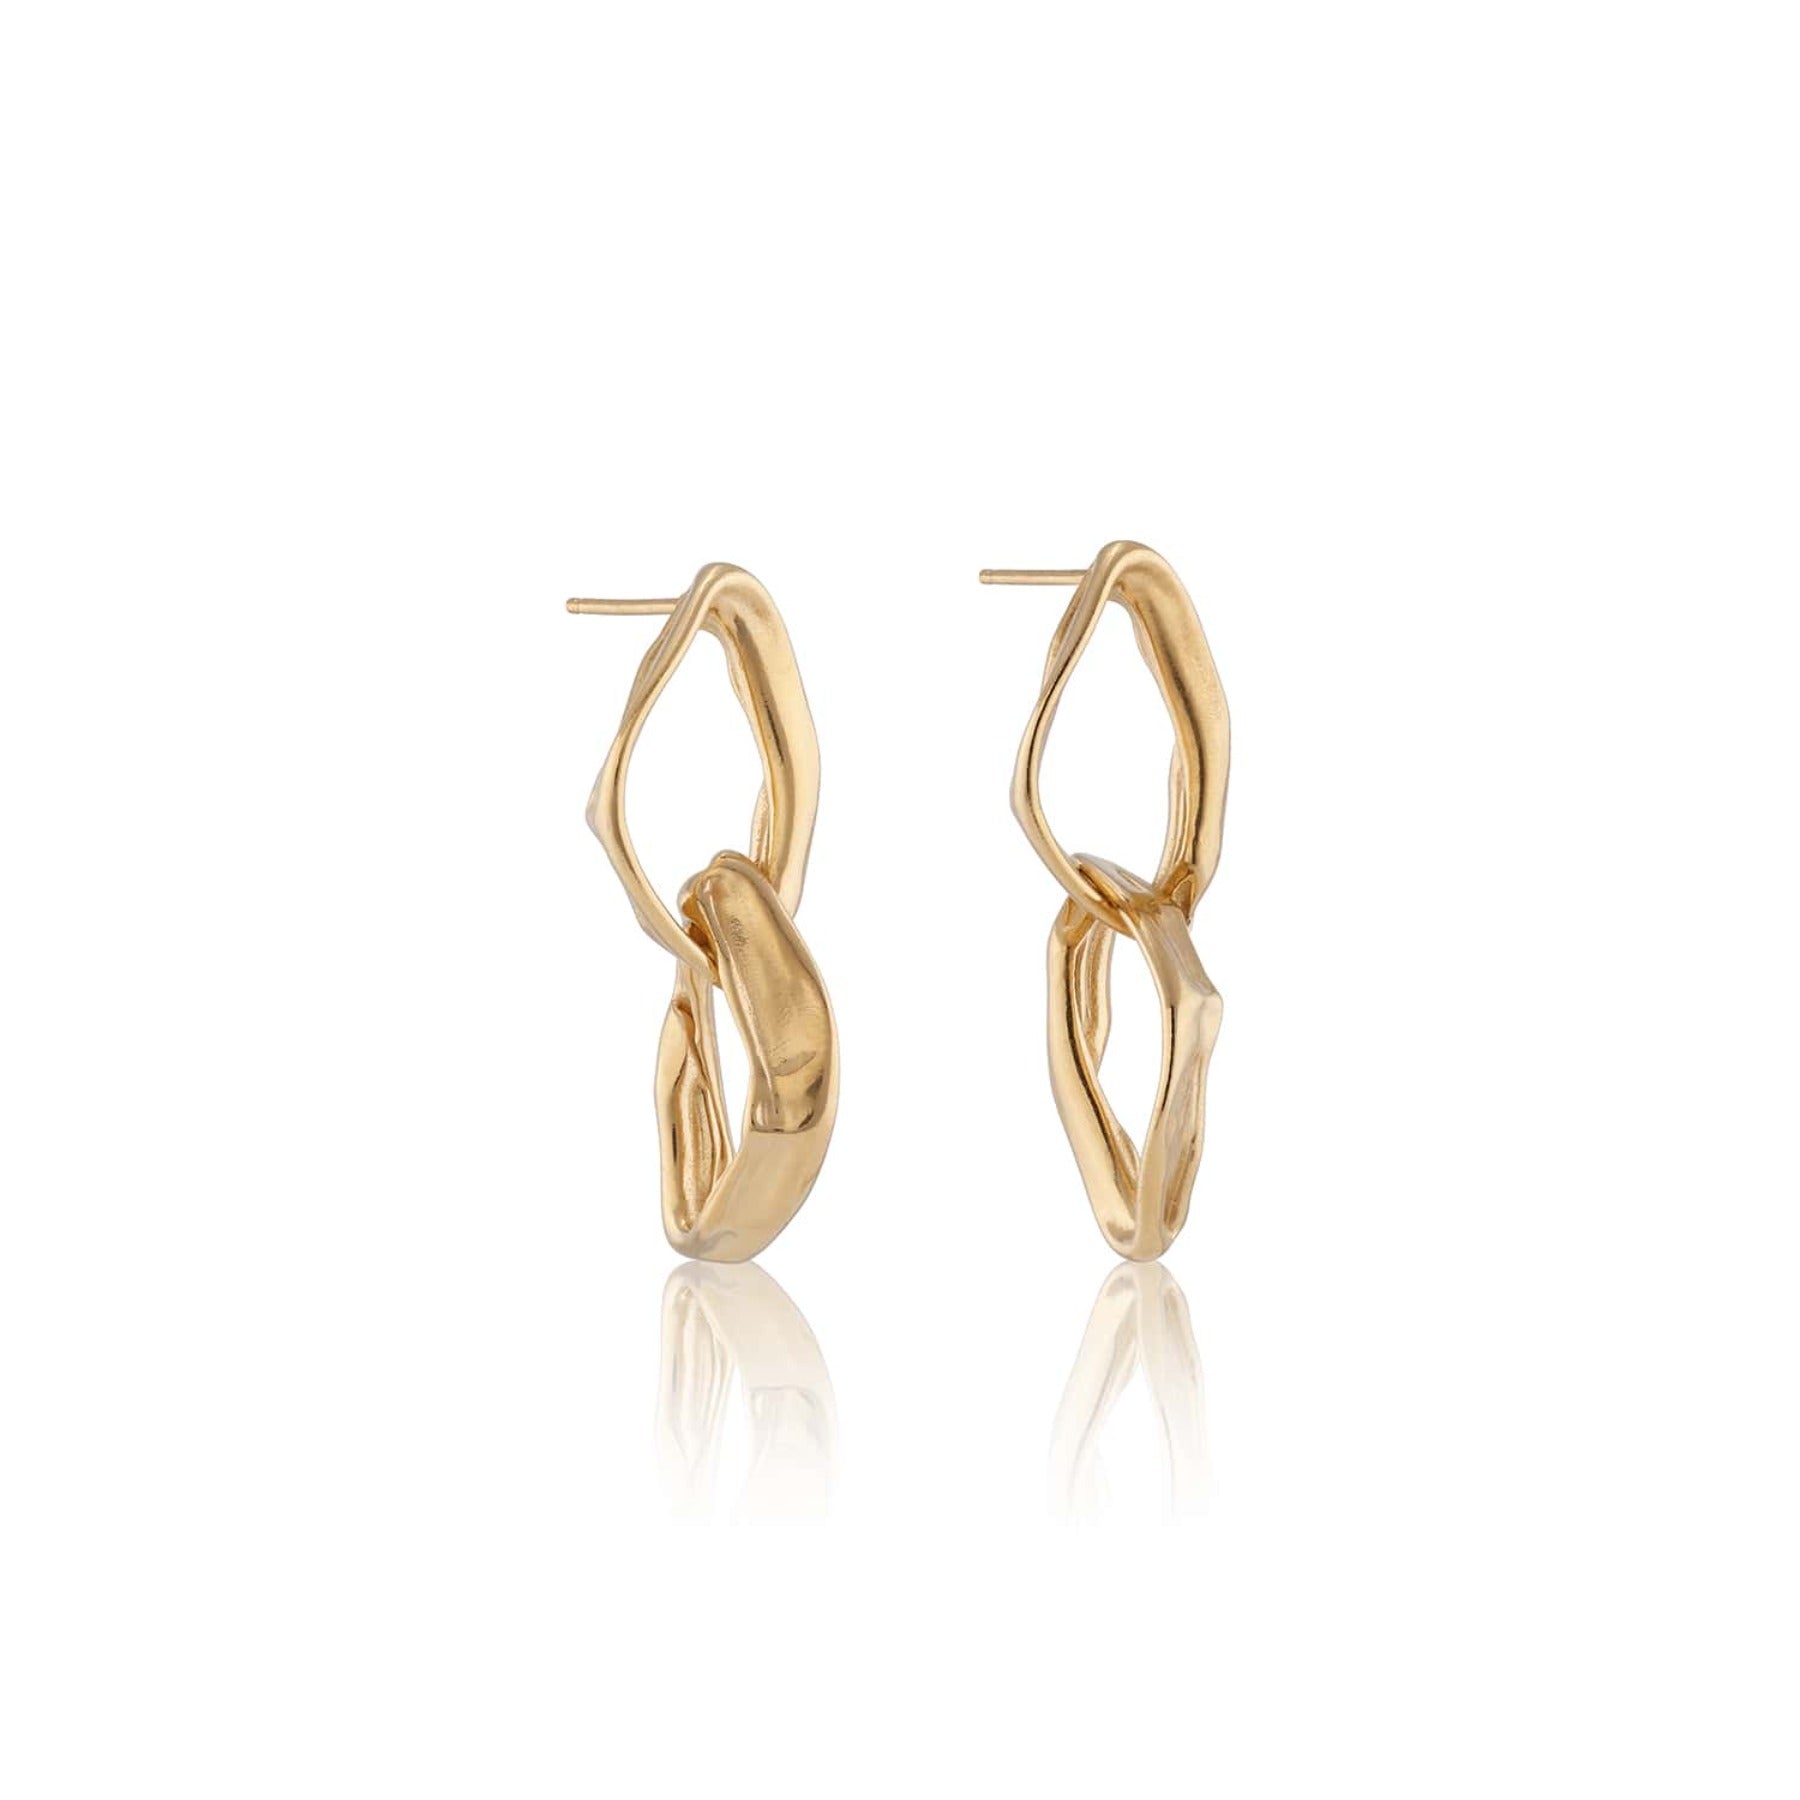 Abstract chunky interlocking gold chain link earrings in 18k gold vermeil.